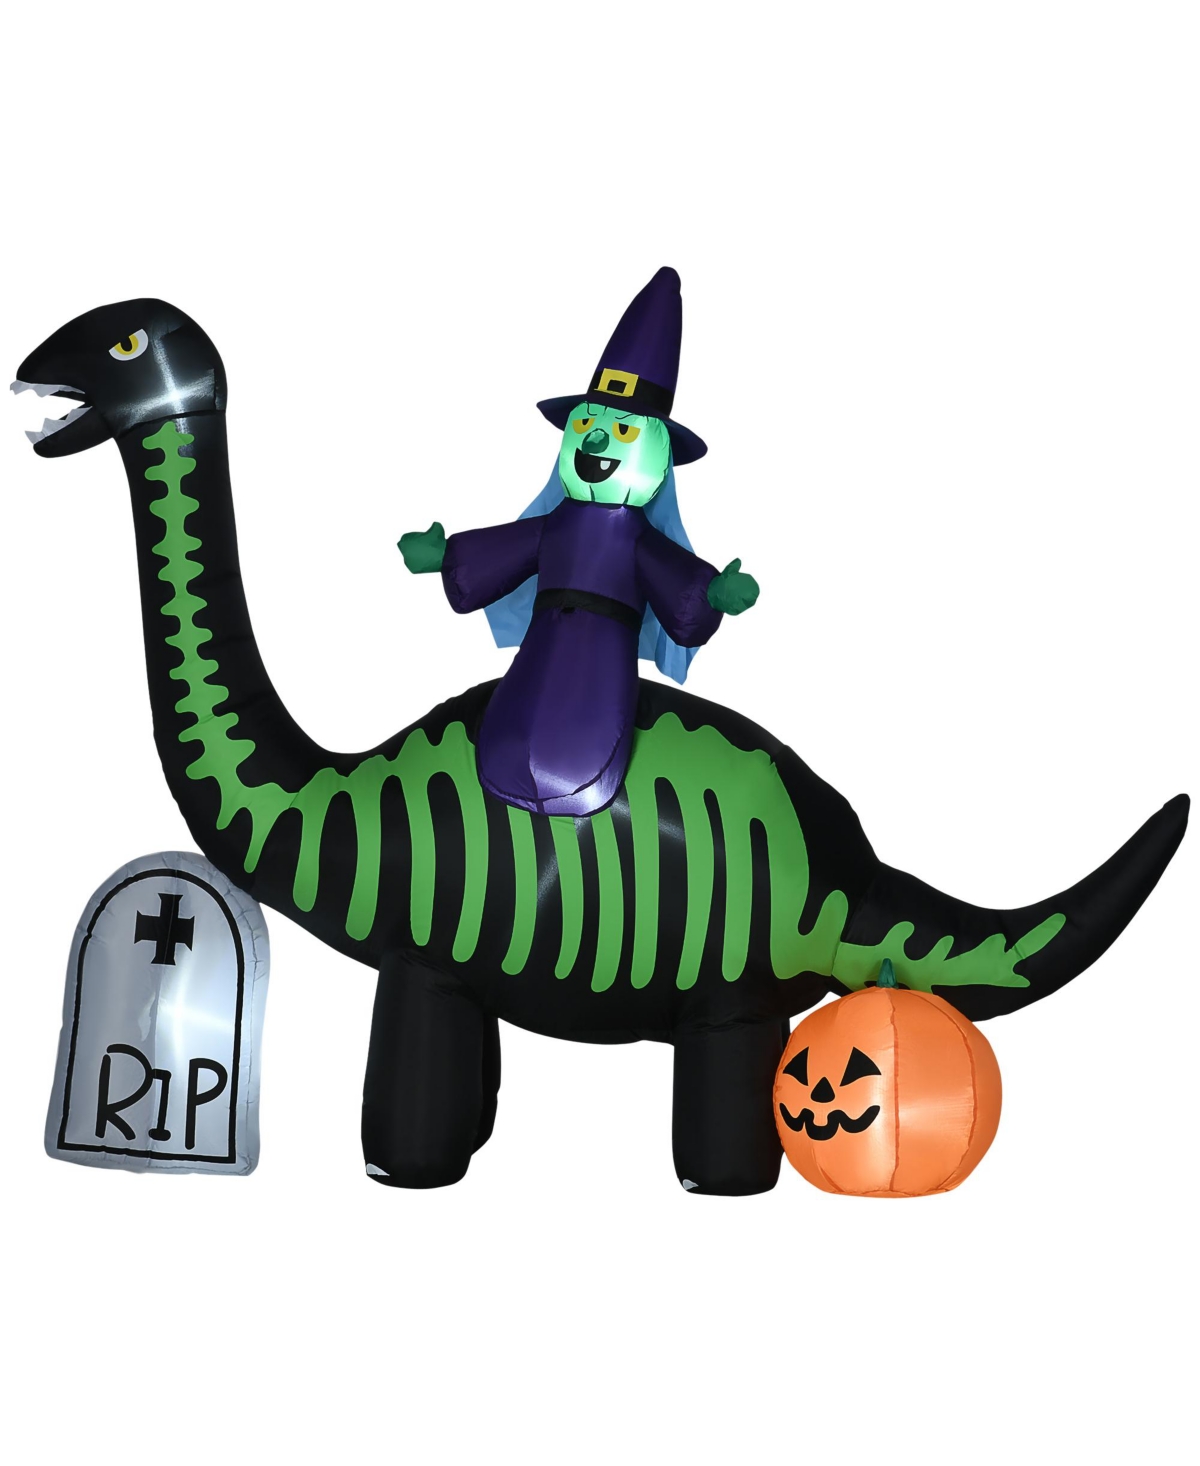 7' Halloween Inflatable Dinosaur W/ Witch Tombstone Pumpkin - Multi-colored